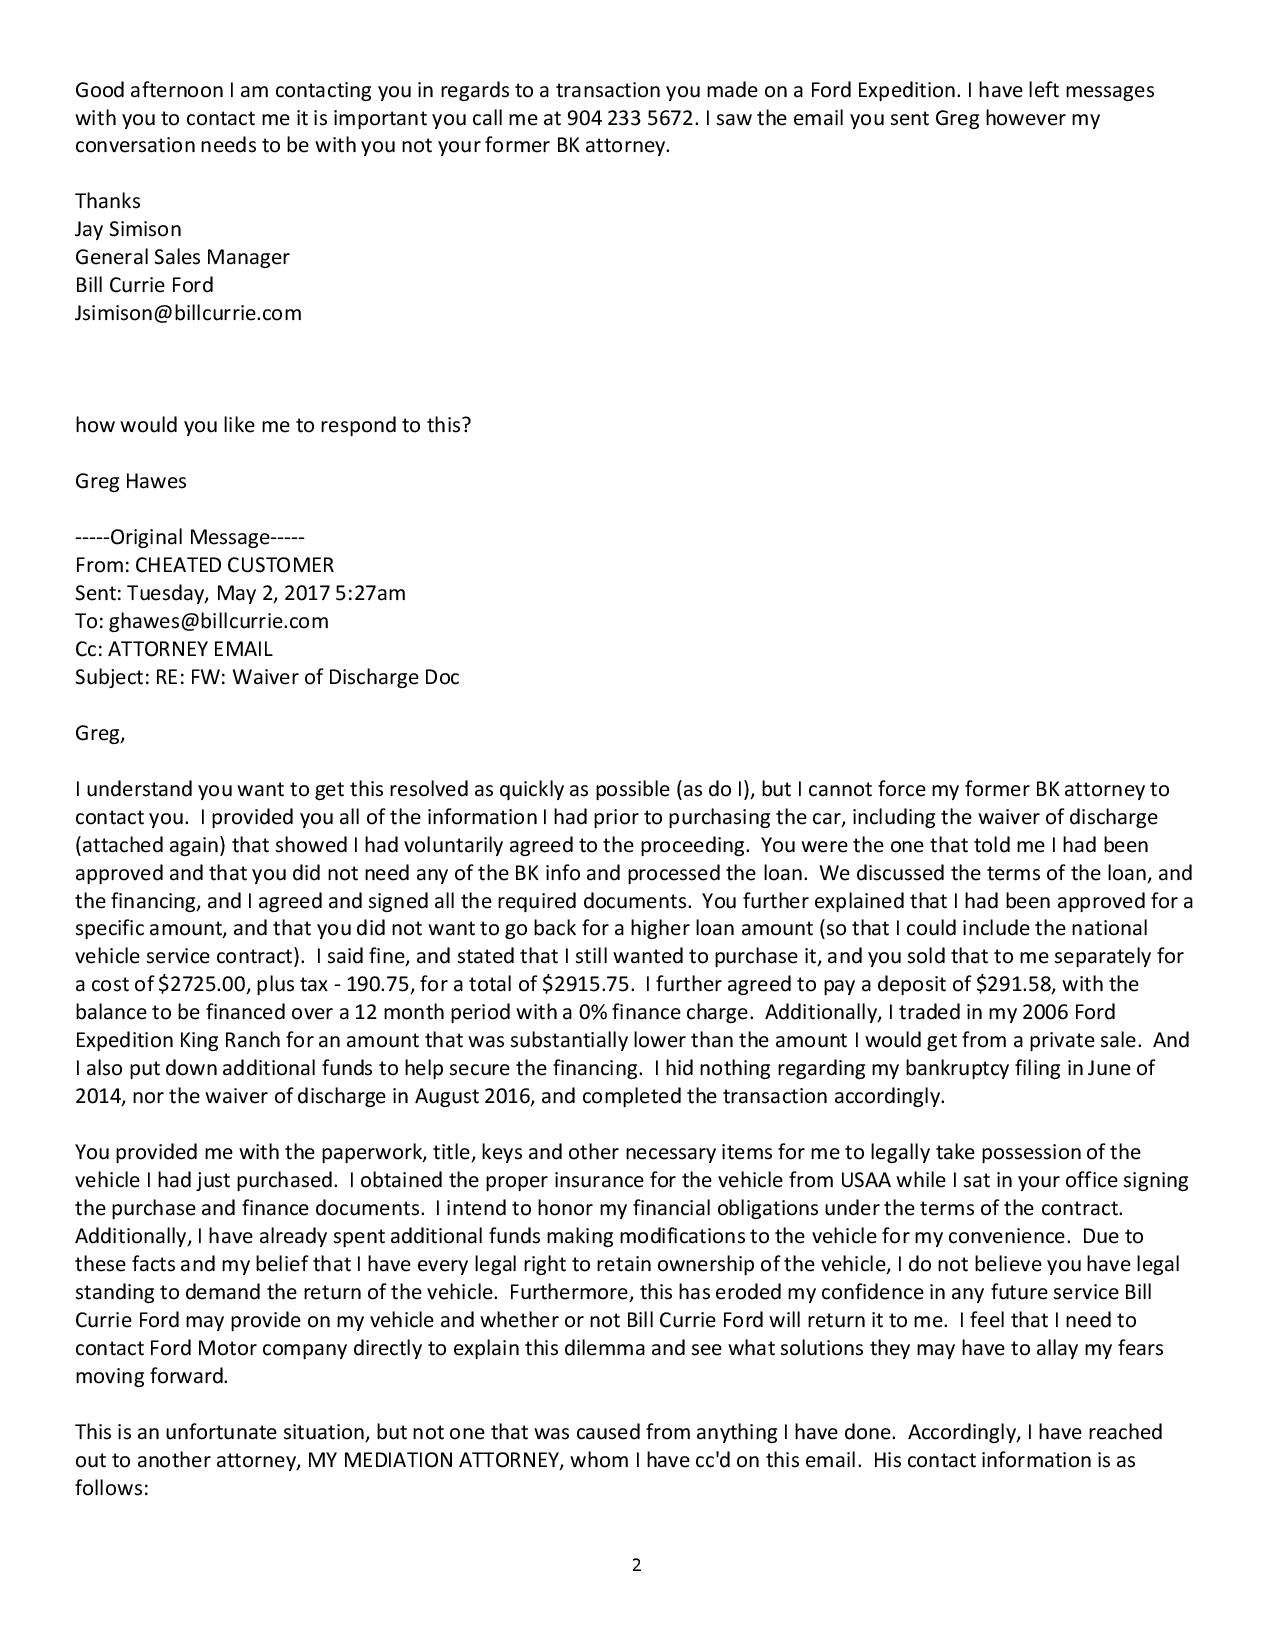 Bill Currie Ford sucks email2